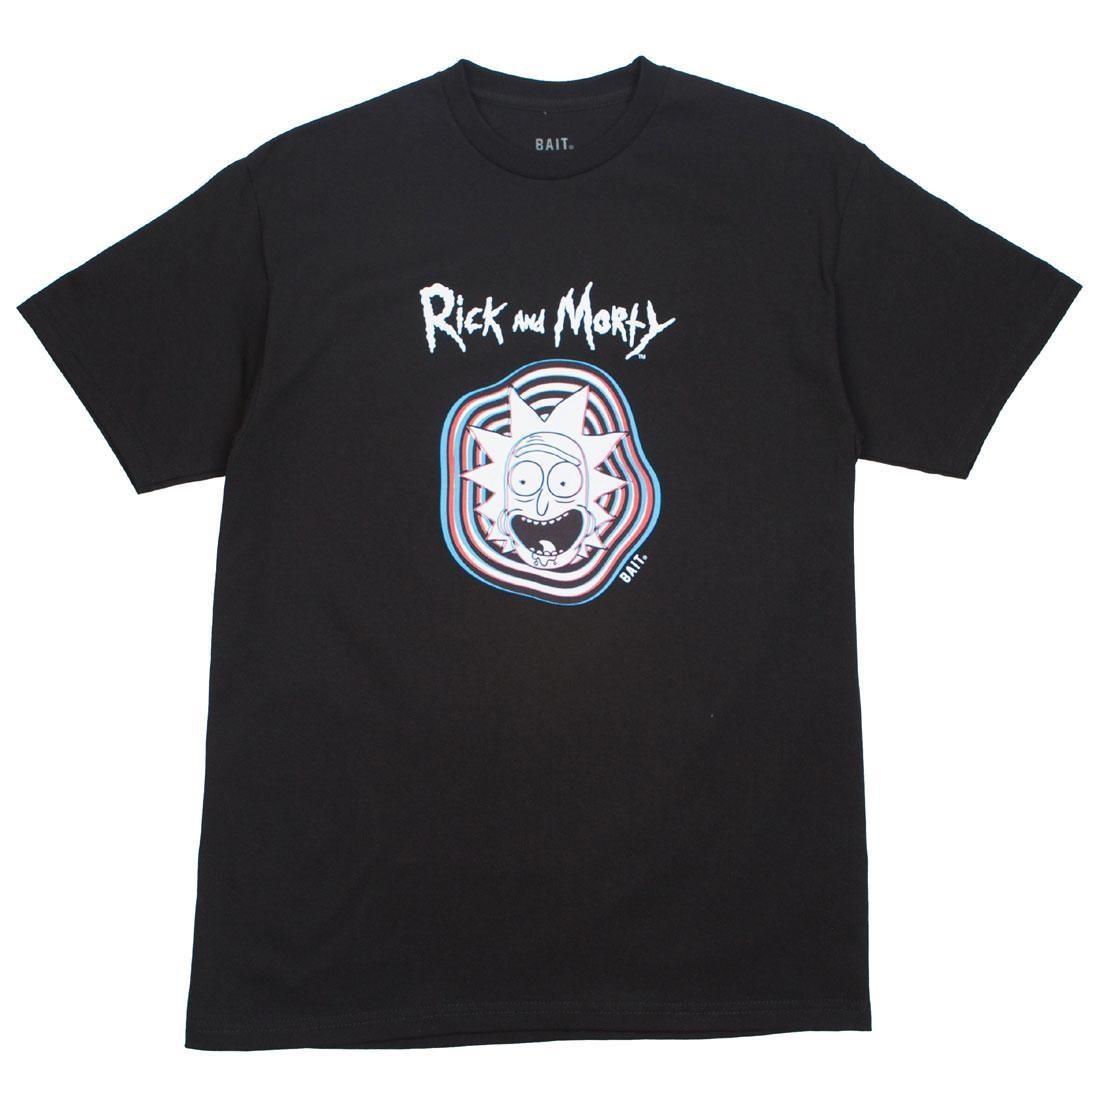 BAIT x Rick and Morty Men Psychedelic Trippy Tee (black)